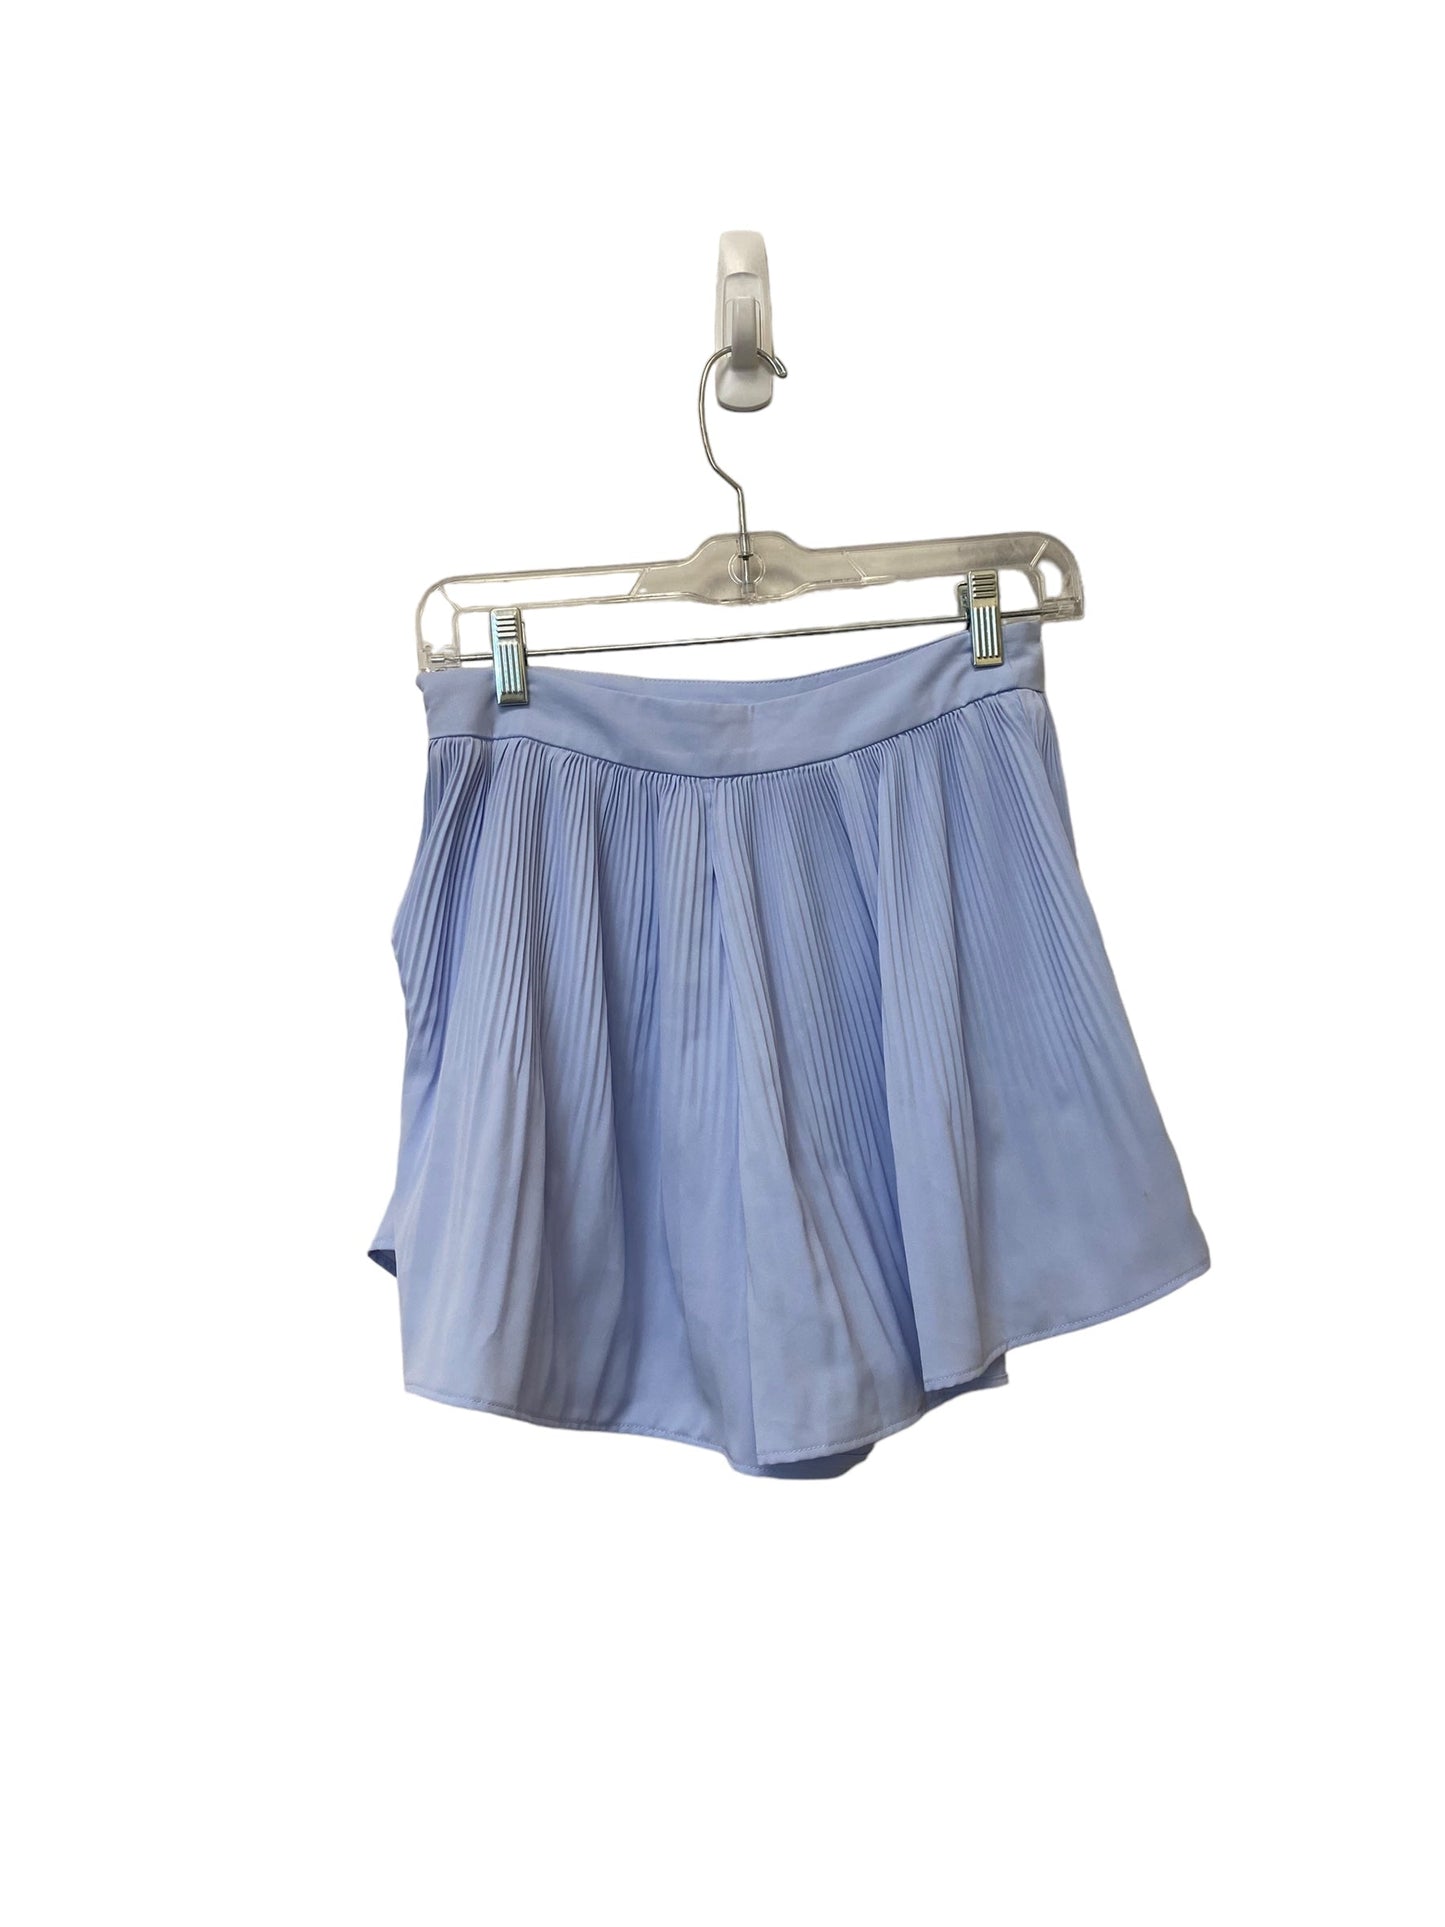 Blue Shorts Clothes Mentor, Size S